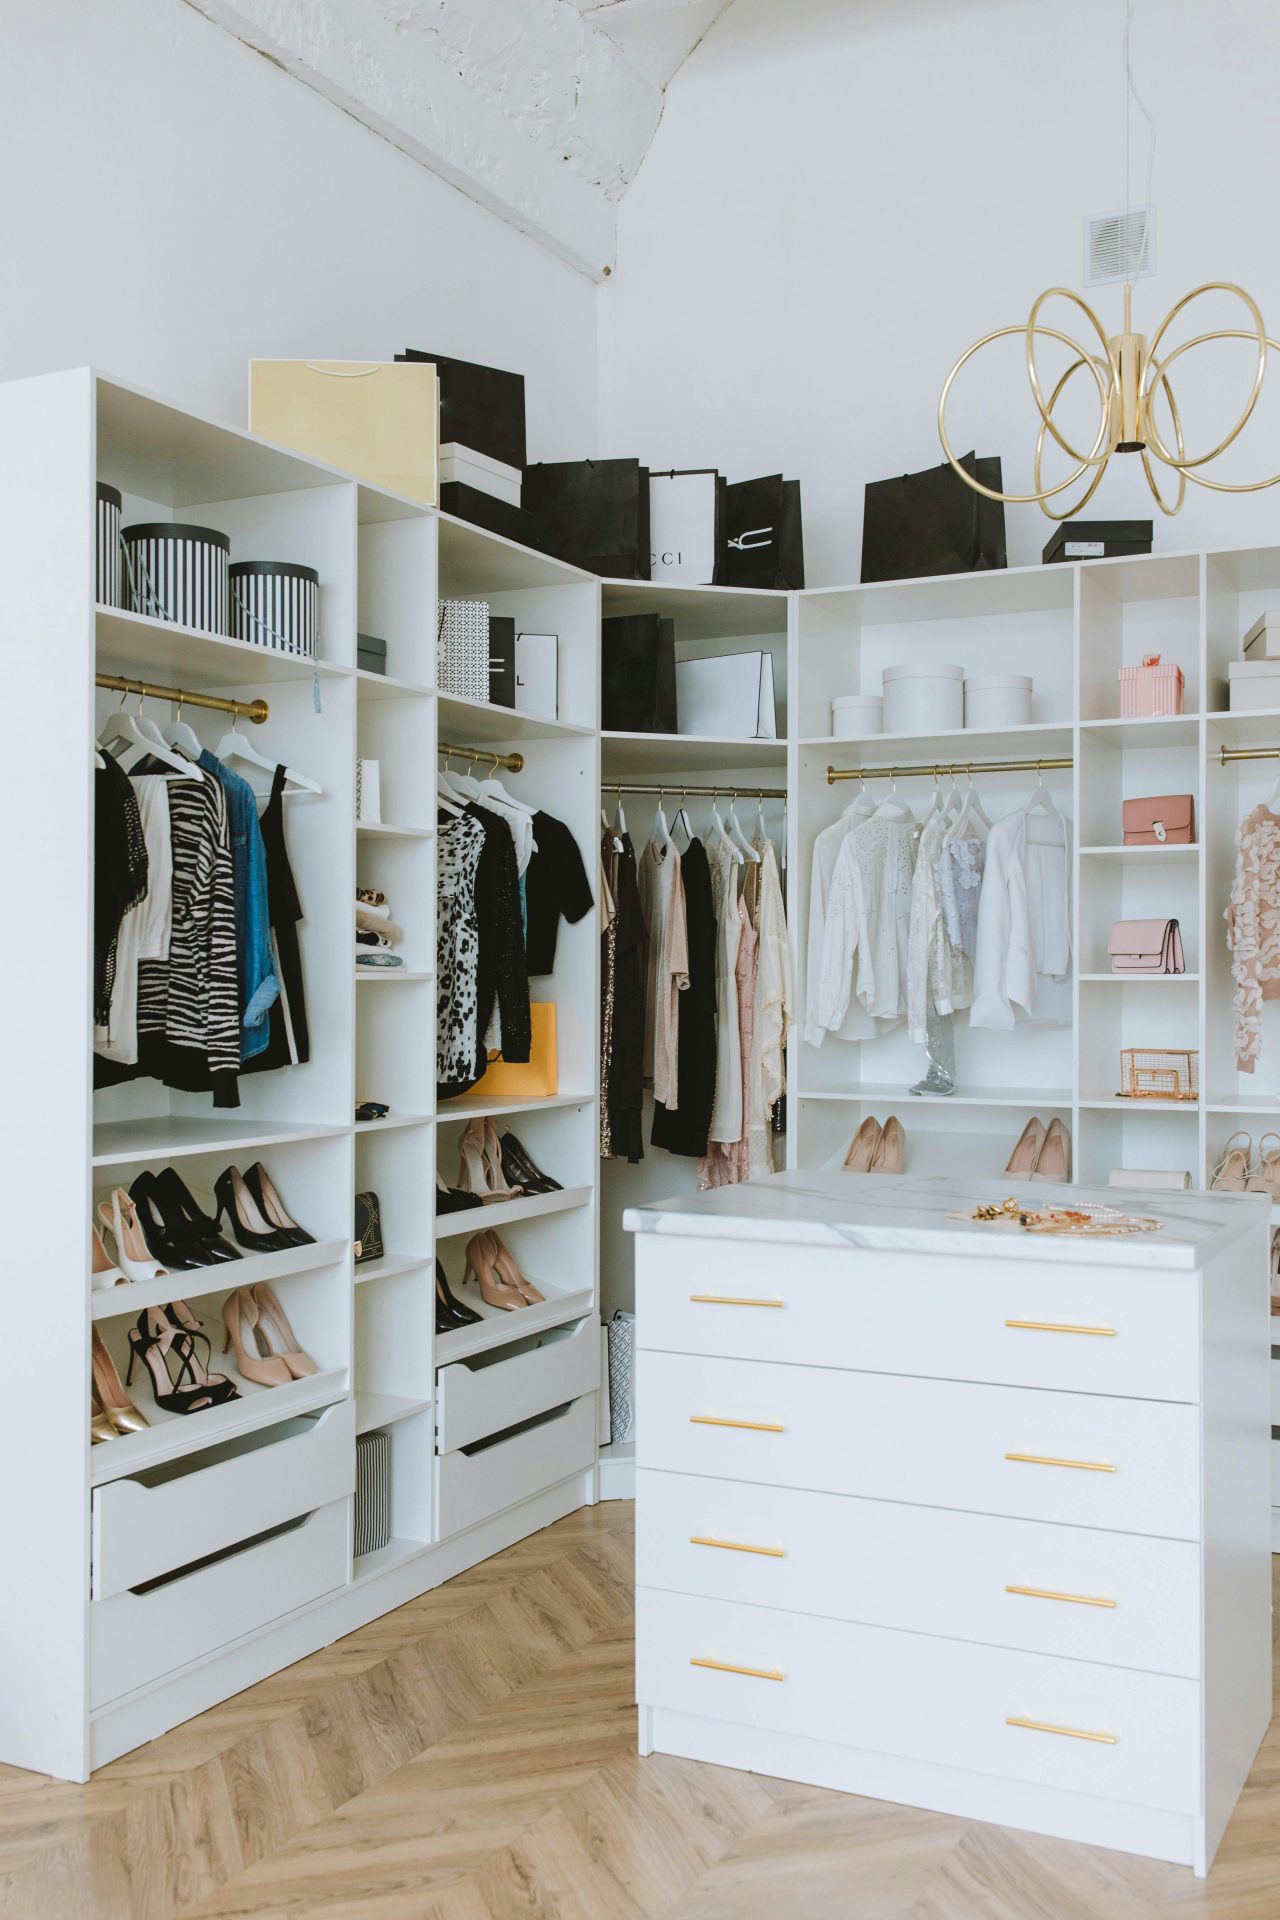 Introduction to Mudroom Storage Solutions